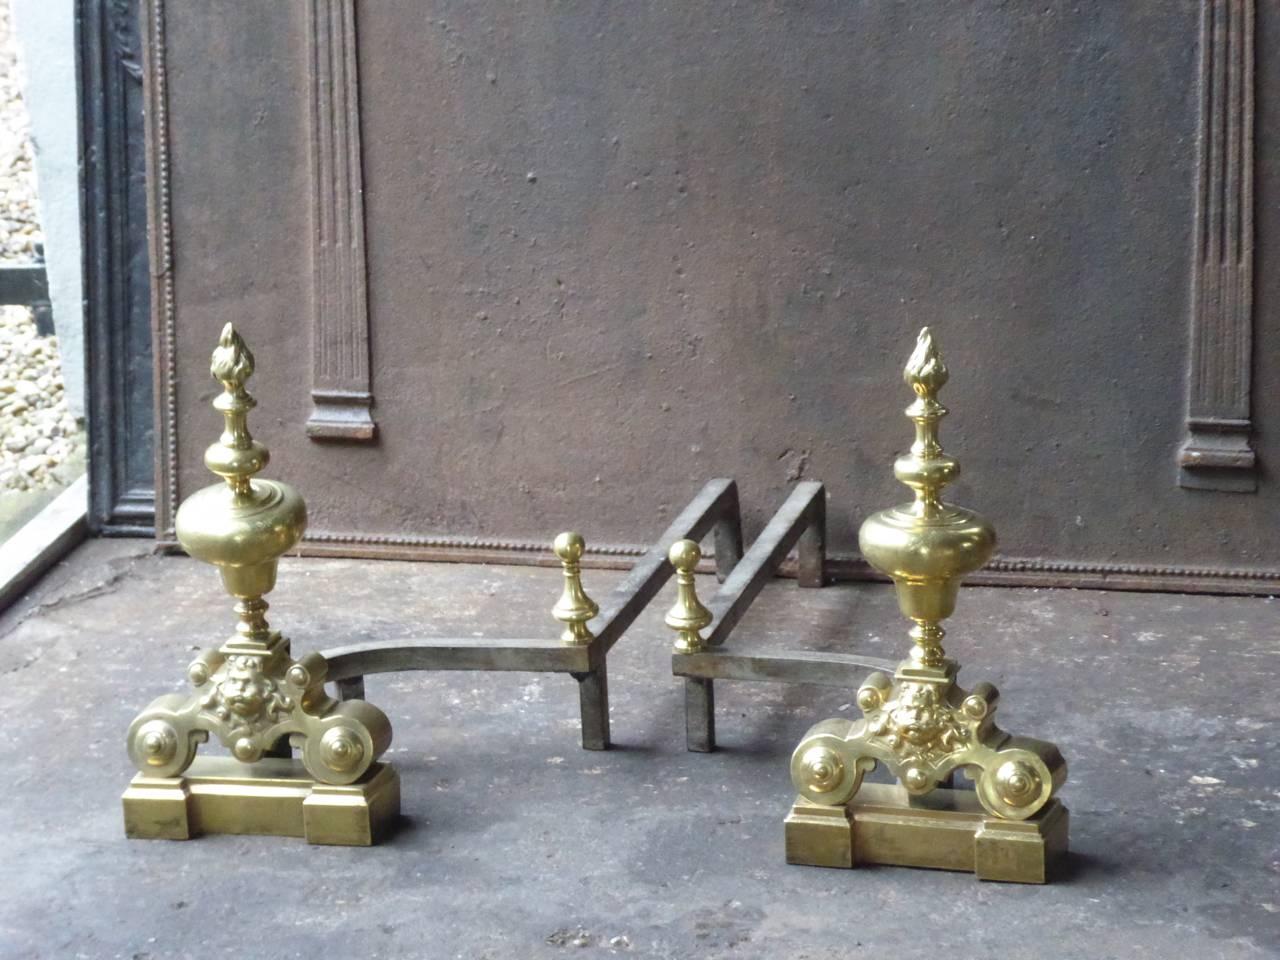 Polished Antique French Louis XIV Style Andirons or Firedogs